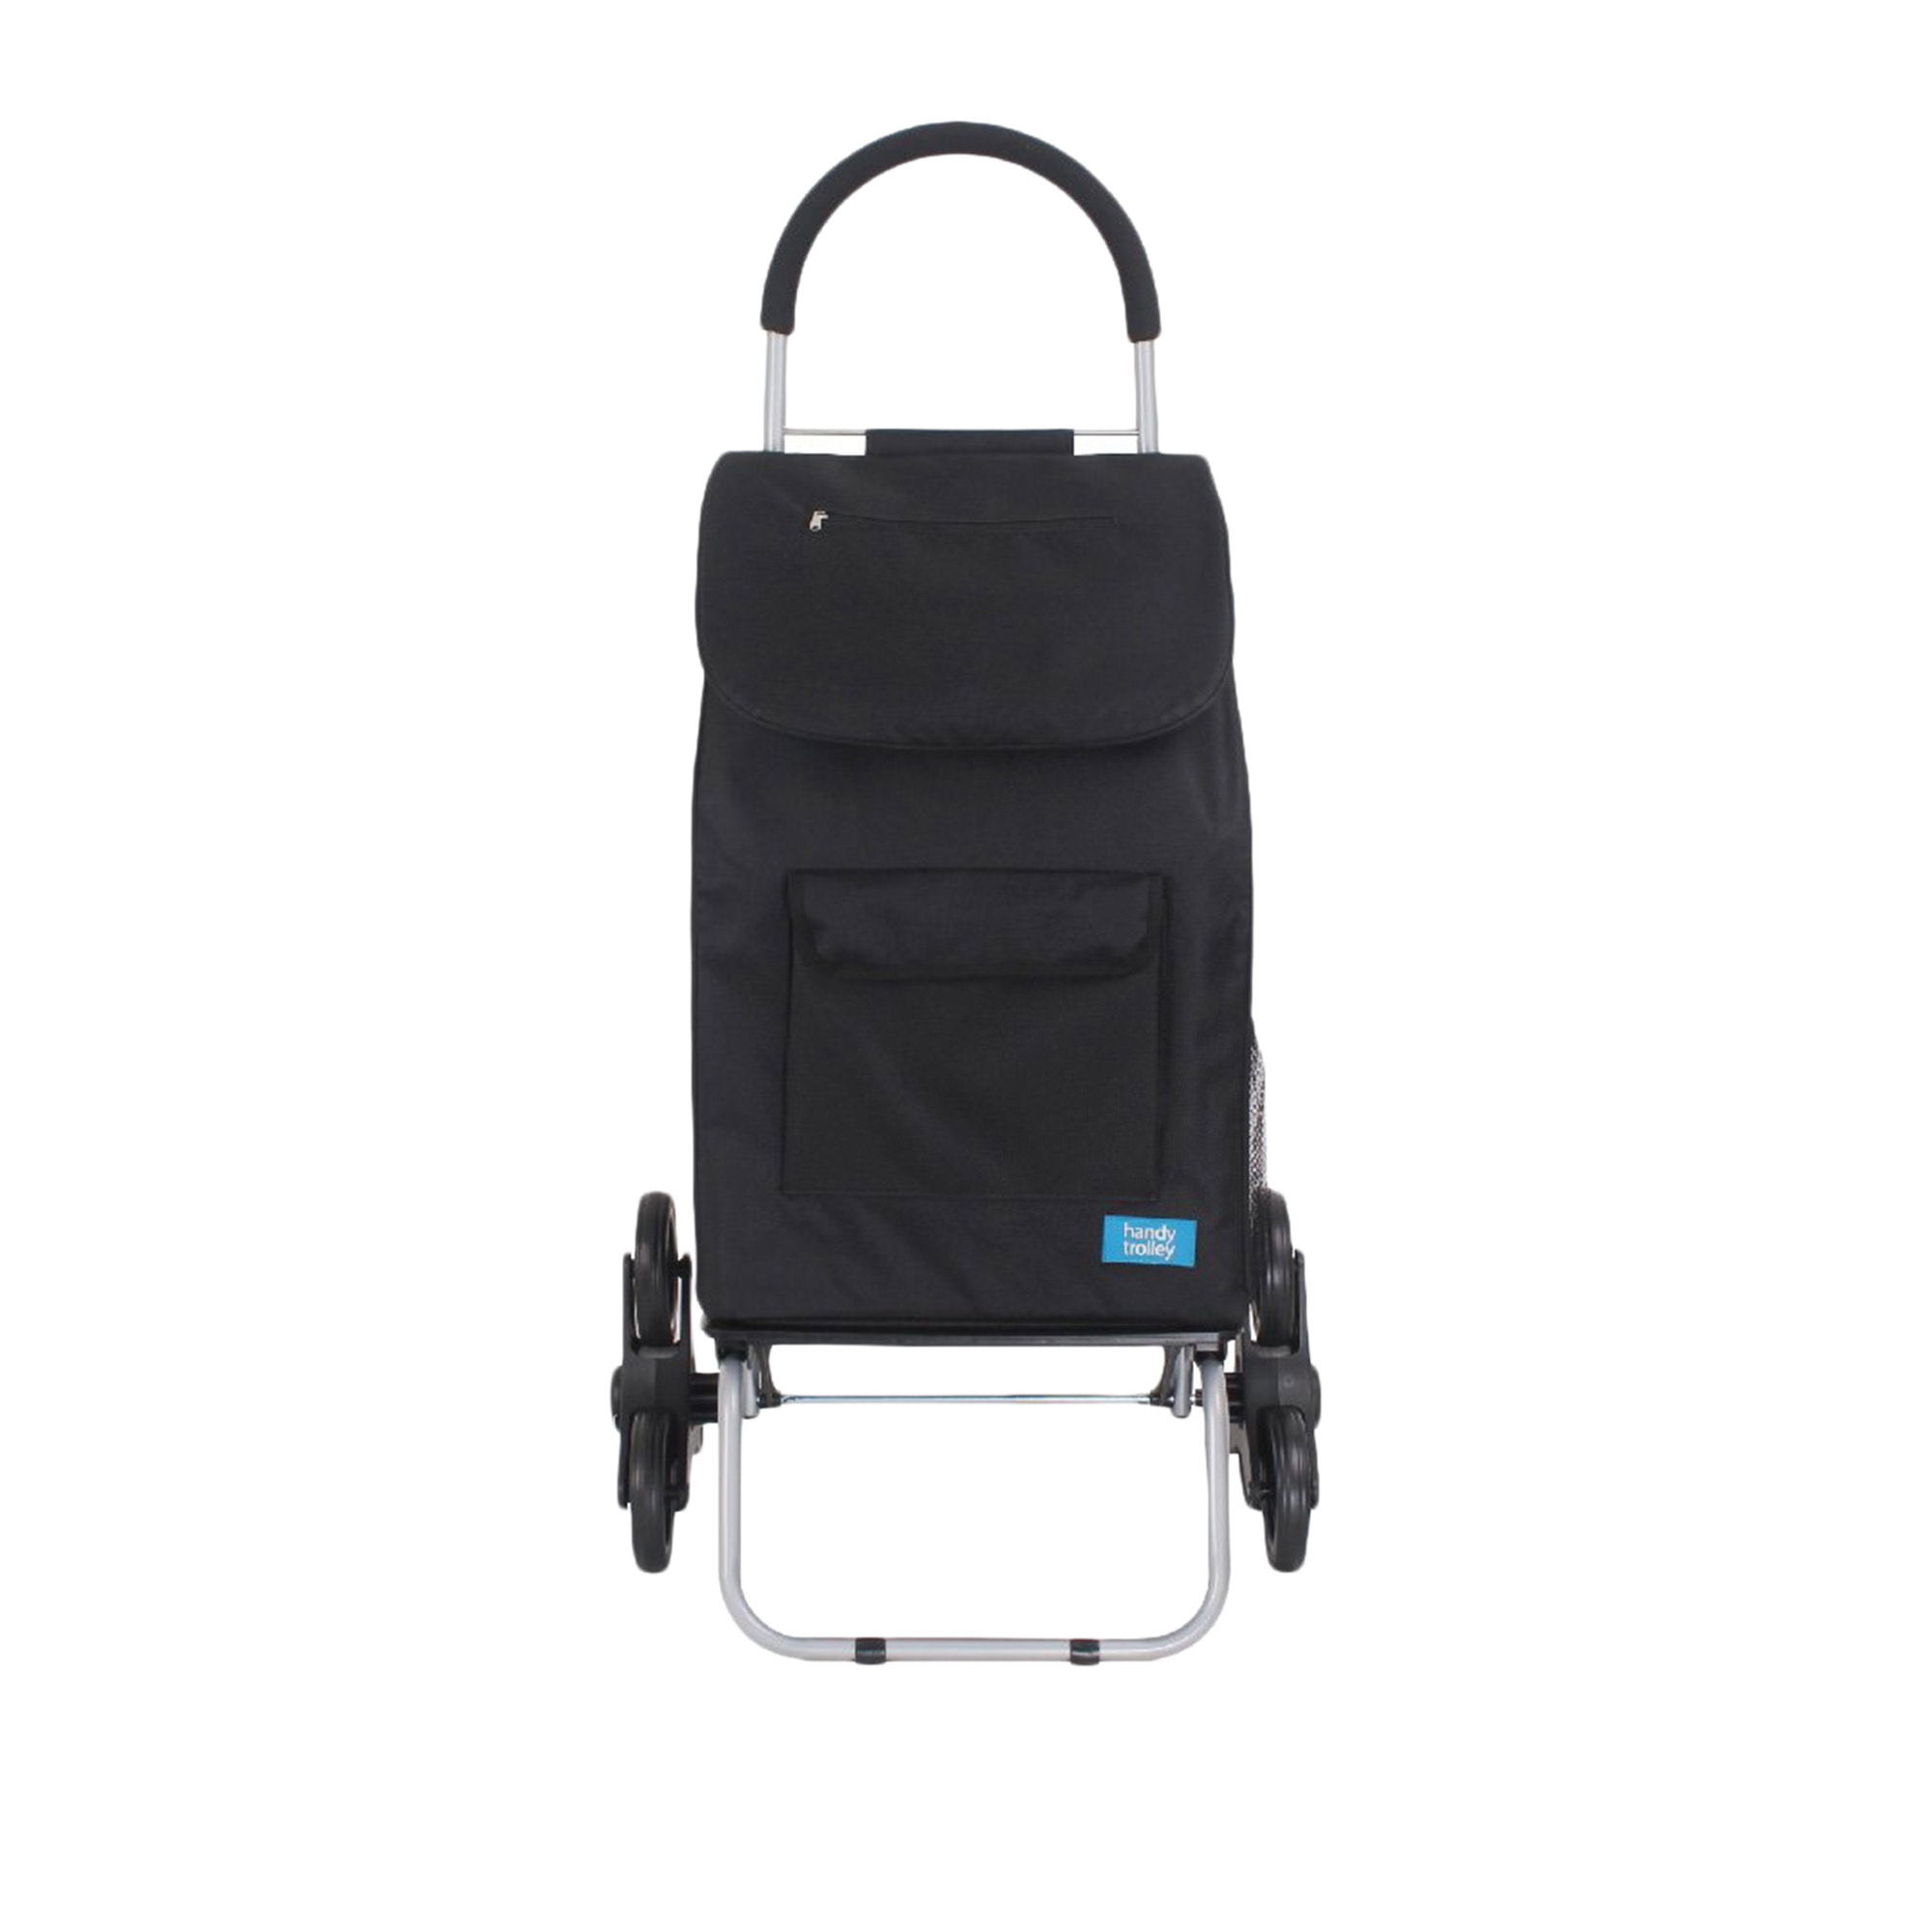 White Magic Handy Trolley with Climbing Wheels Black Image 1